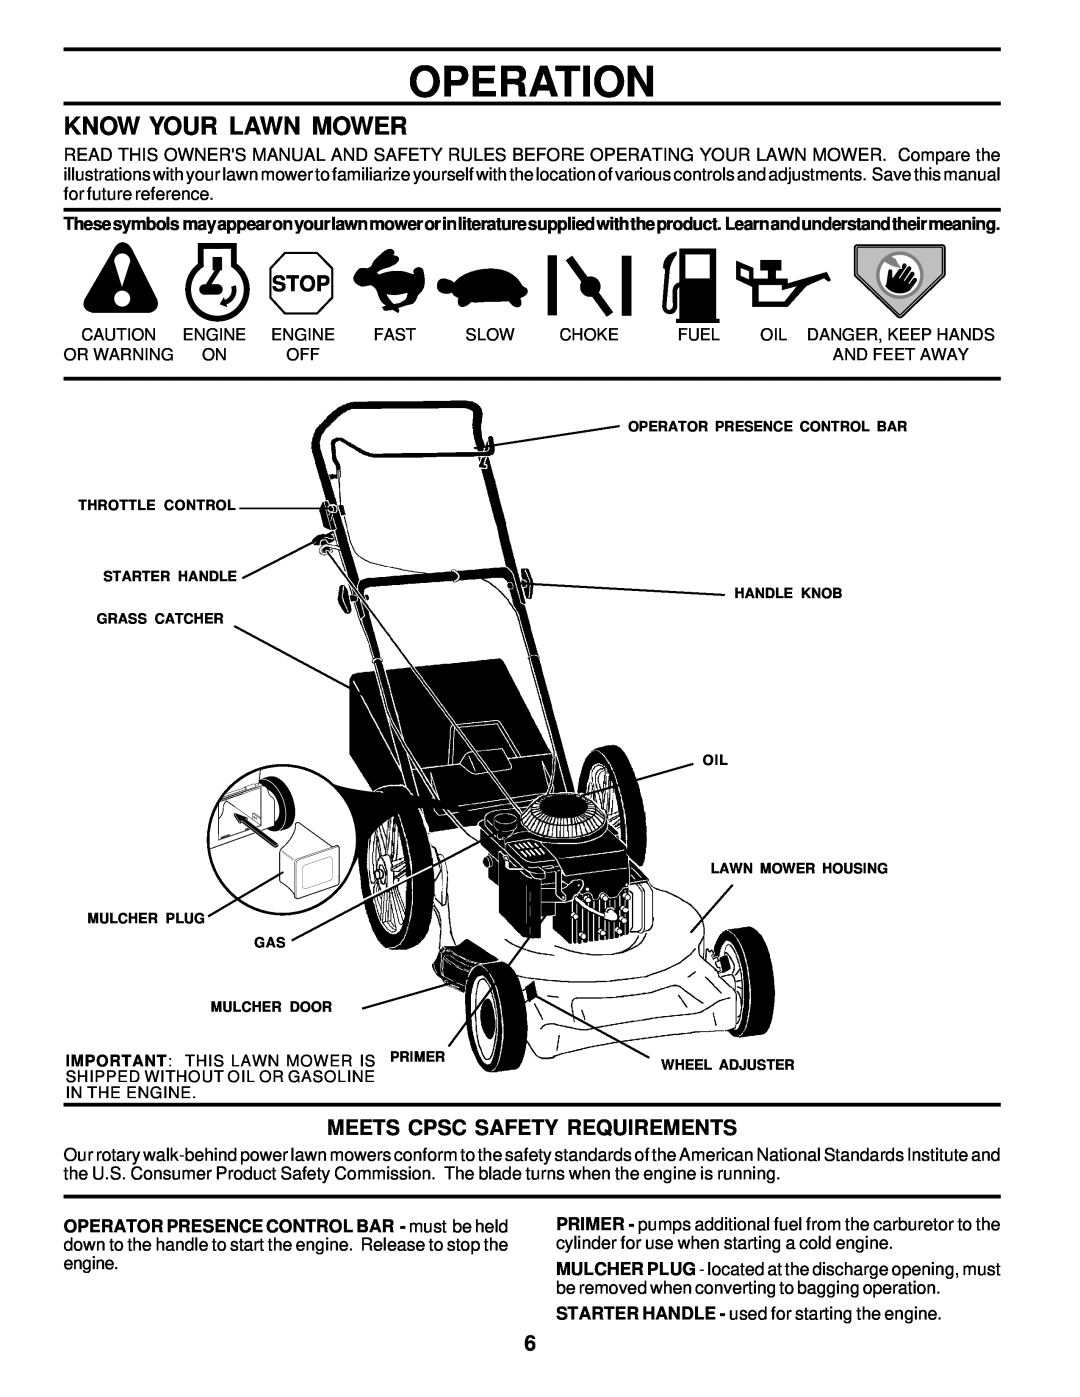 Husqvarna 6022CH owner manual Operation, Know Your Lawn Mower, Meets Cpsc Safety Requirements 